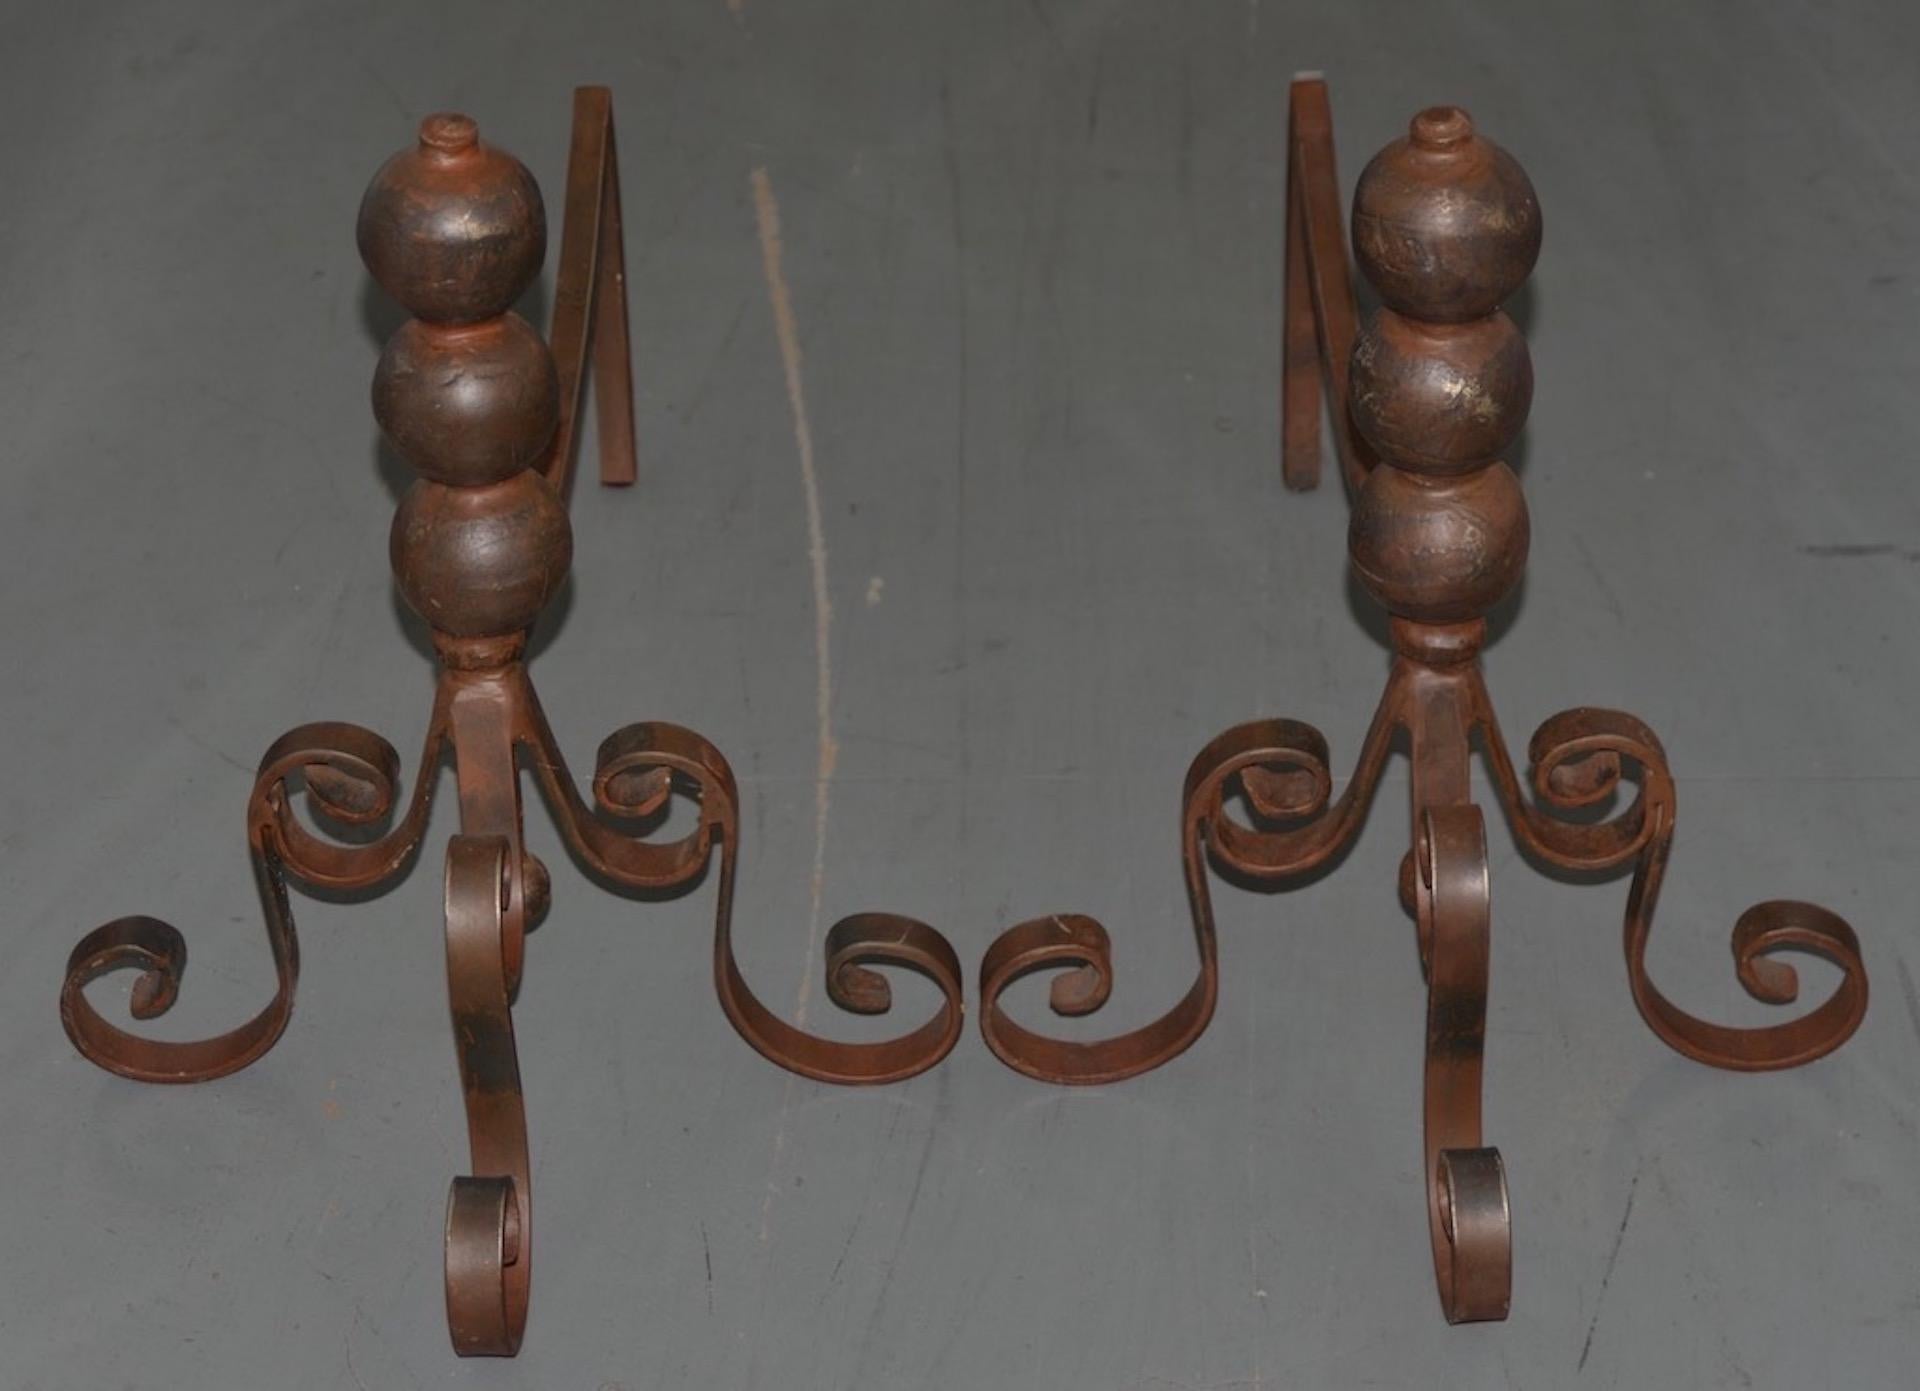 Pair of Jan Barboglio wrought iron andirons

Fine pair of designer andirons. Each andiron is handmade and in excellent condition.

The andirons have a small metal plaque with the Jan Barboglio stamp on it.

Each andiron measures 16